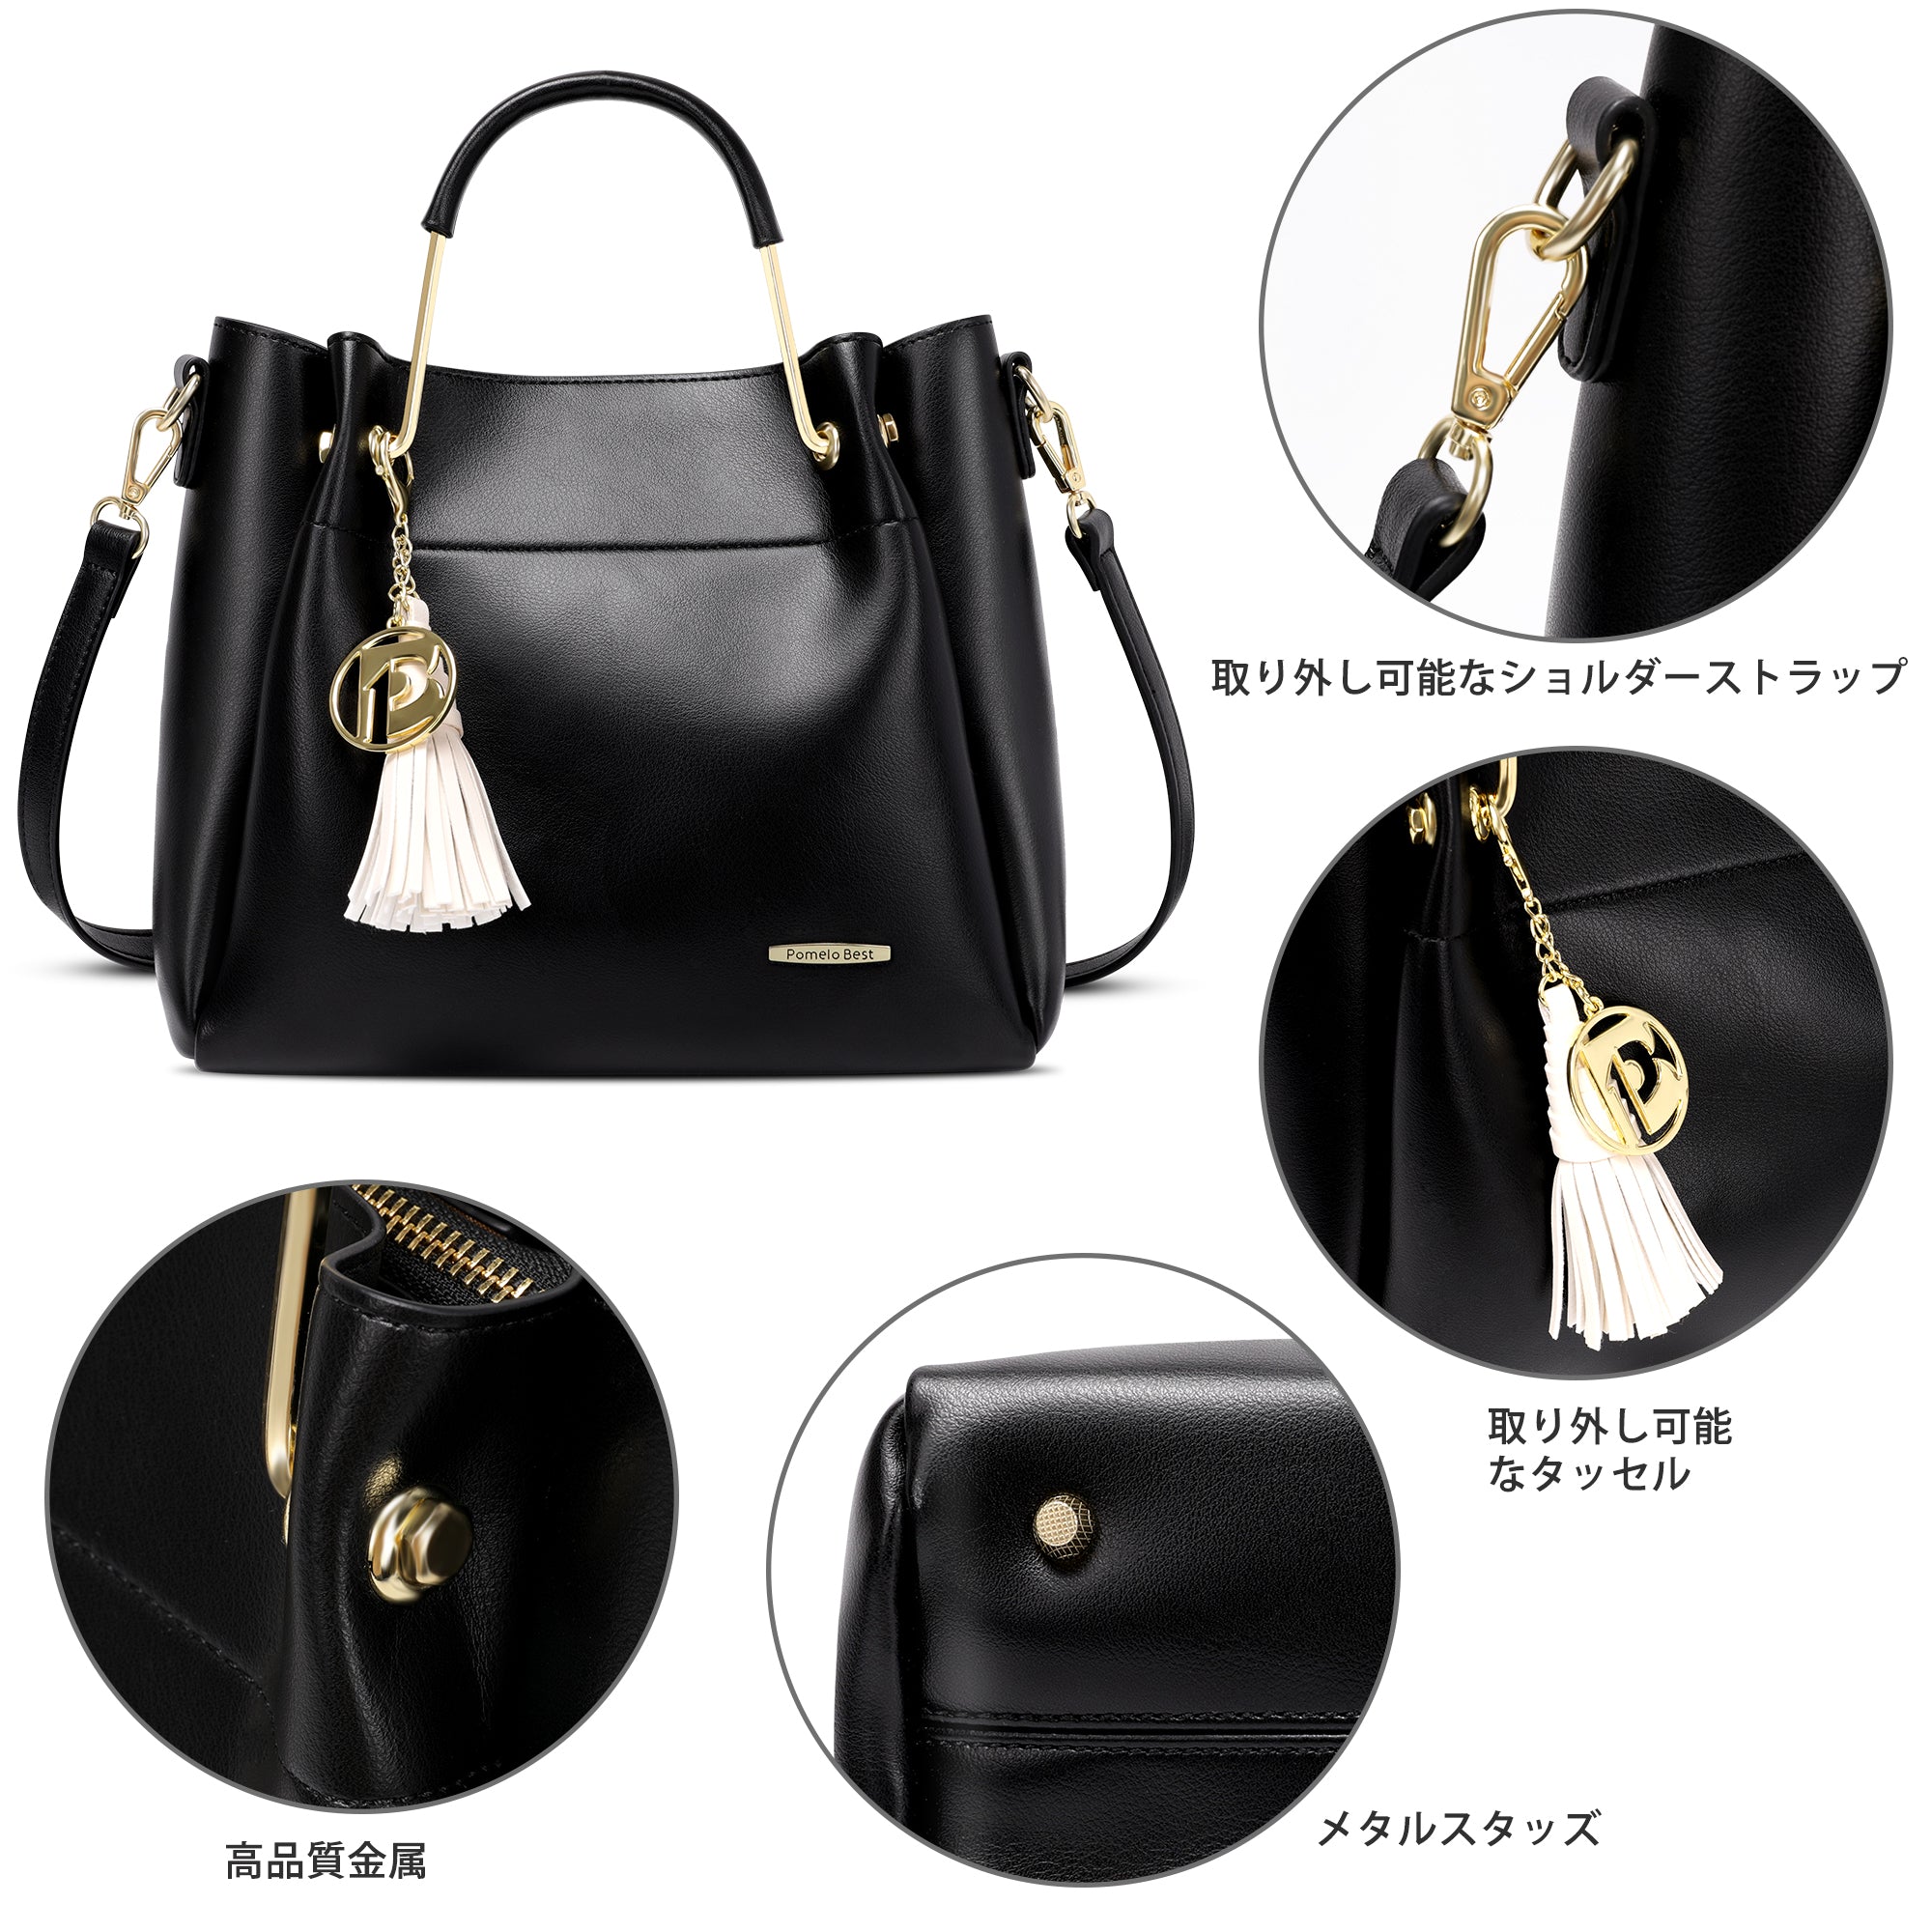 Purses for Women with Detachable Tassel and Handbag for Women Metal Handle